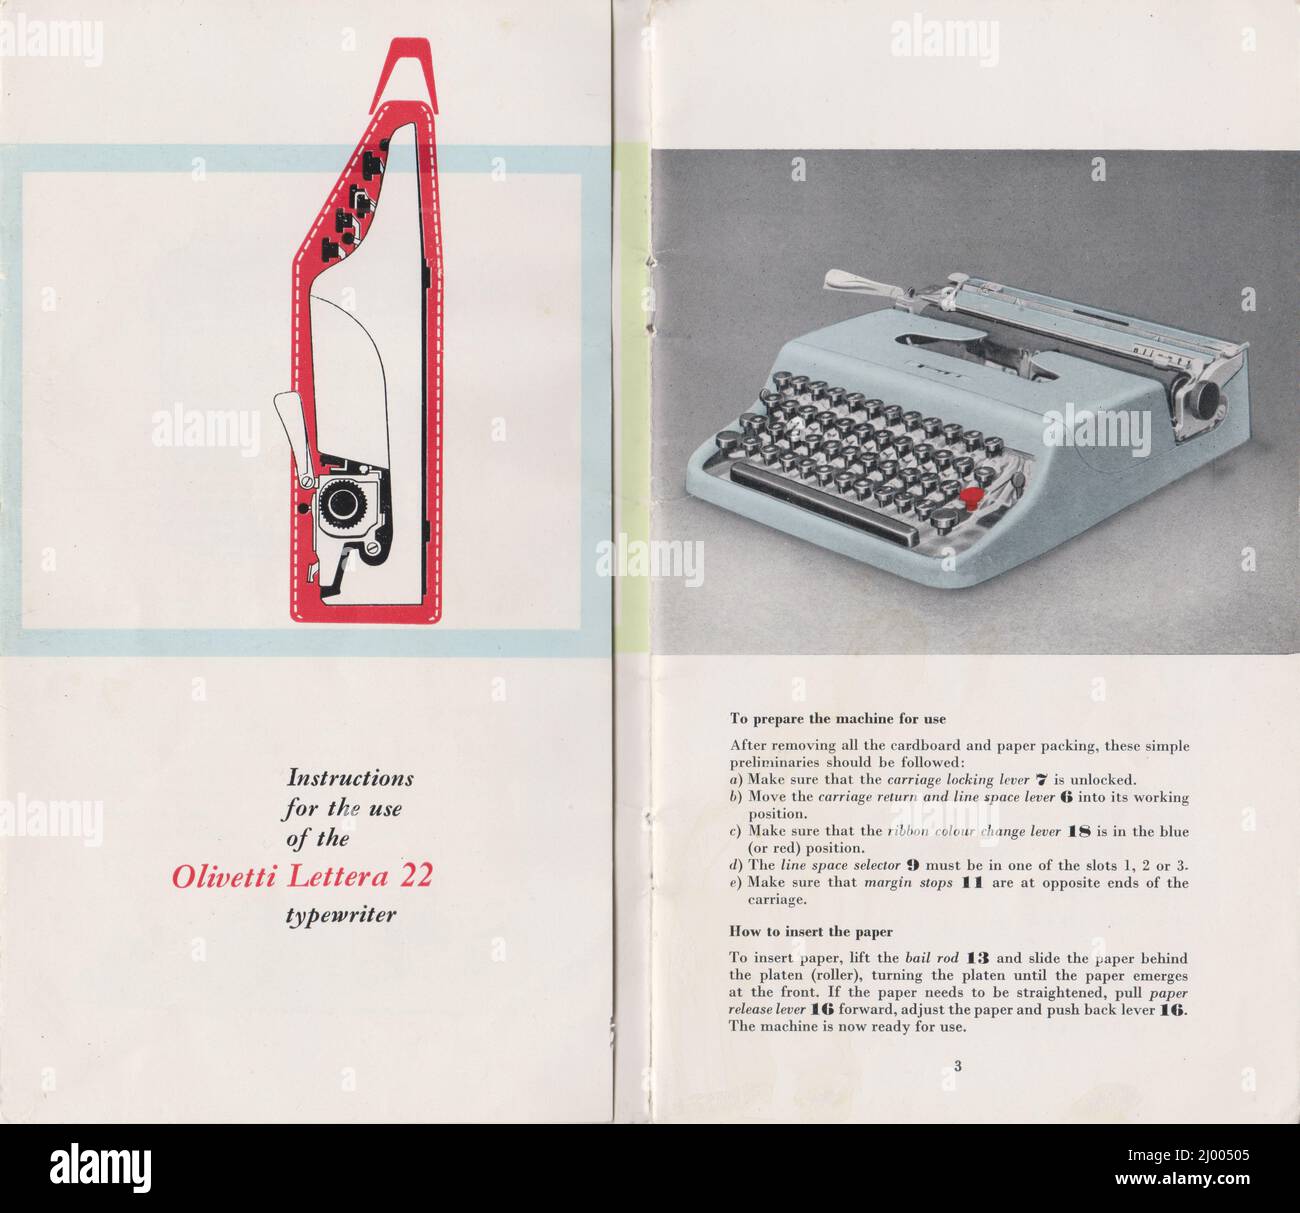 Olivetti Lettera 22 Typewriter Instruction Manual and Typing Guide (1950-1962) Stock Photo